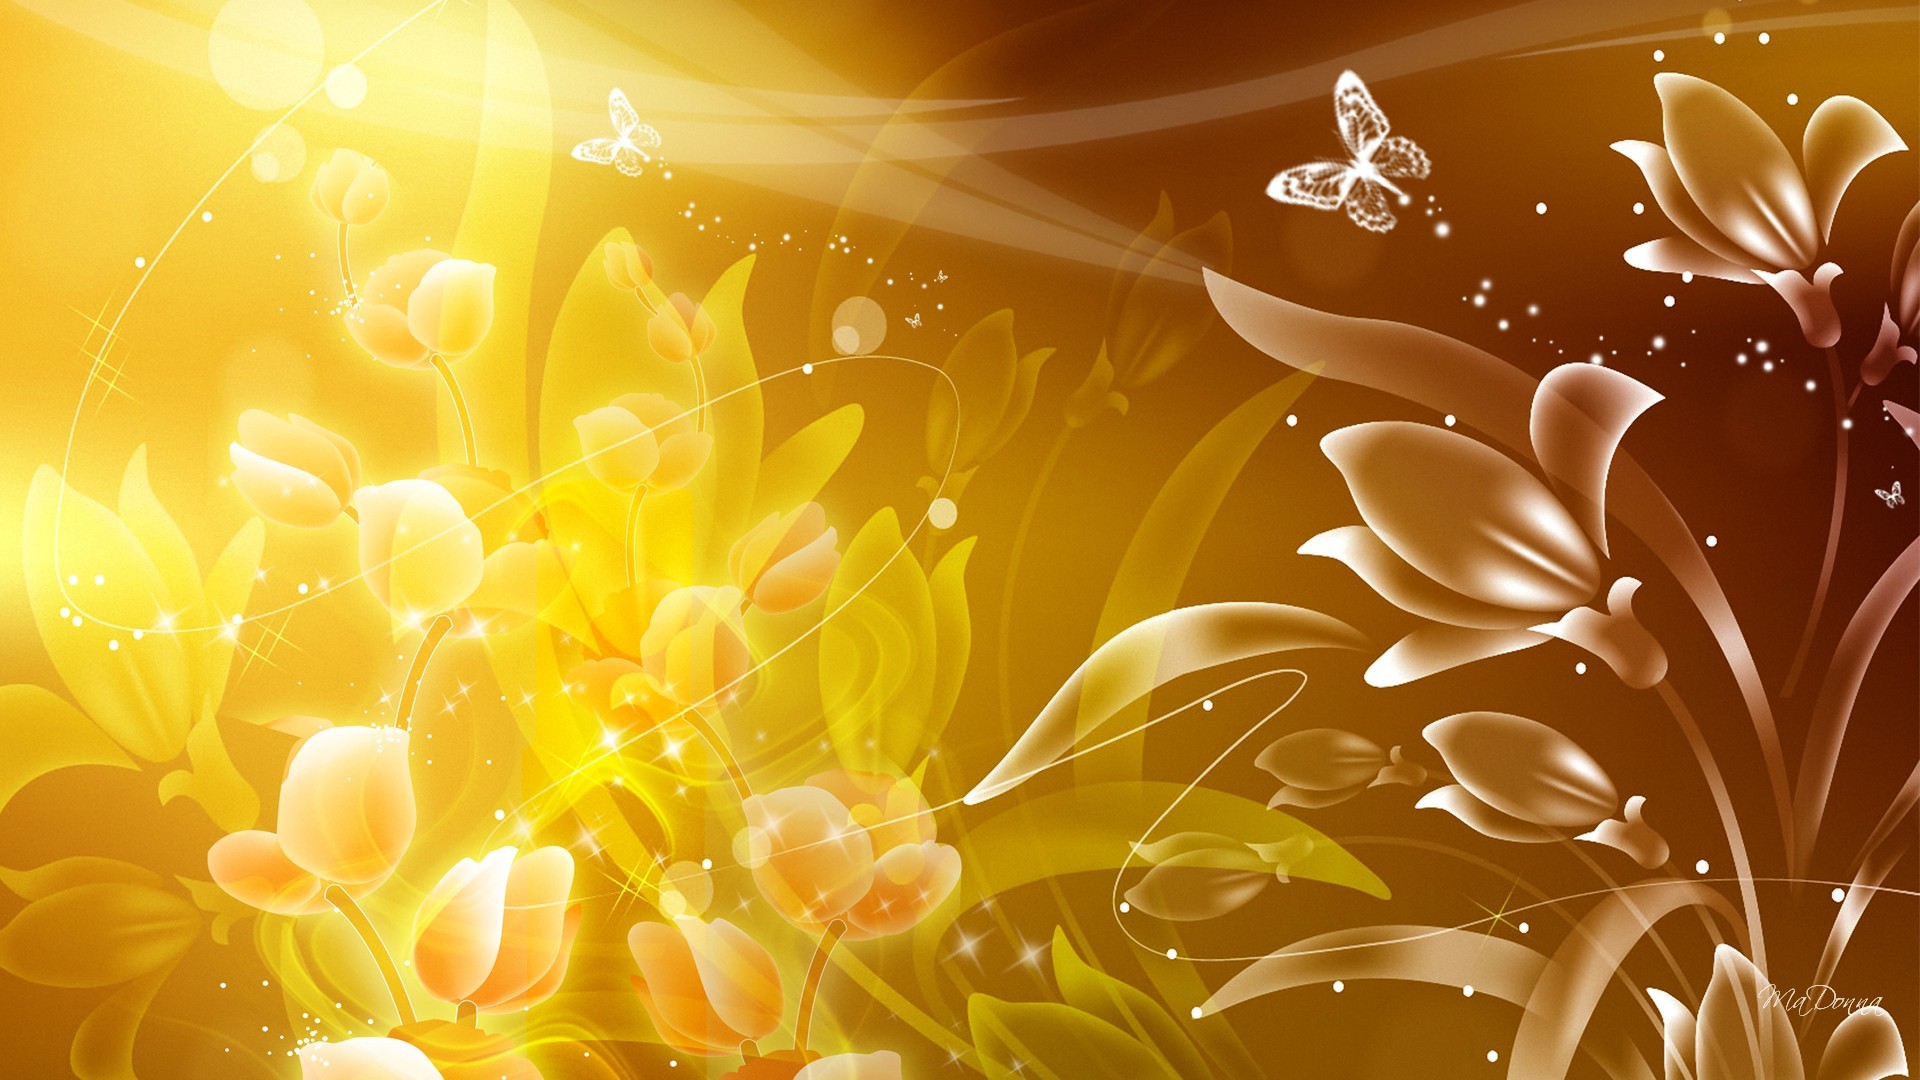 1920x1080, Gold Yellow Wallpapers - Gold Flower Background Hd - 1920x1080  Wallpaper 